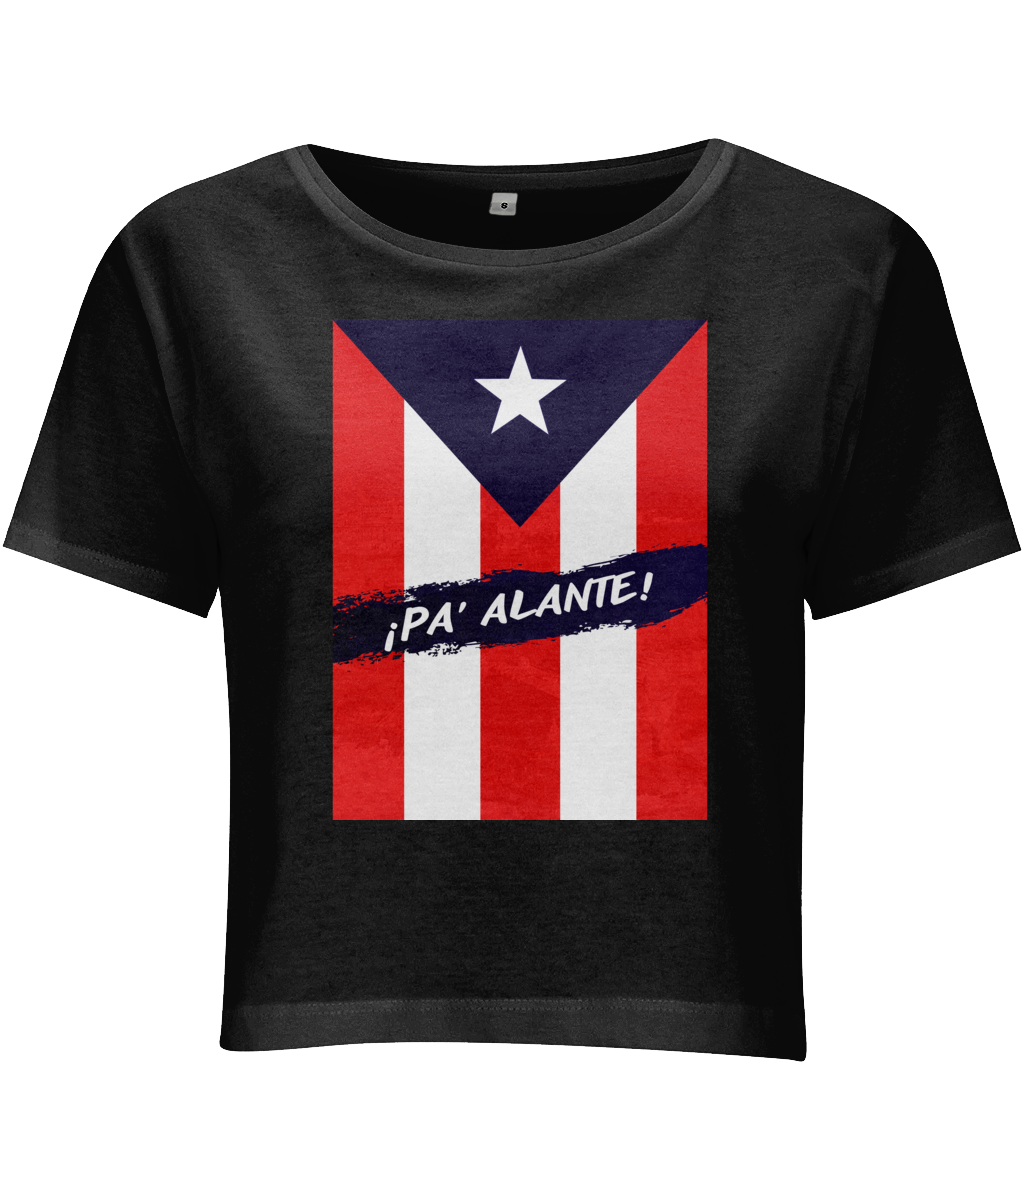 "¡Pa Alante!" Cropped Top Unisex Tee